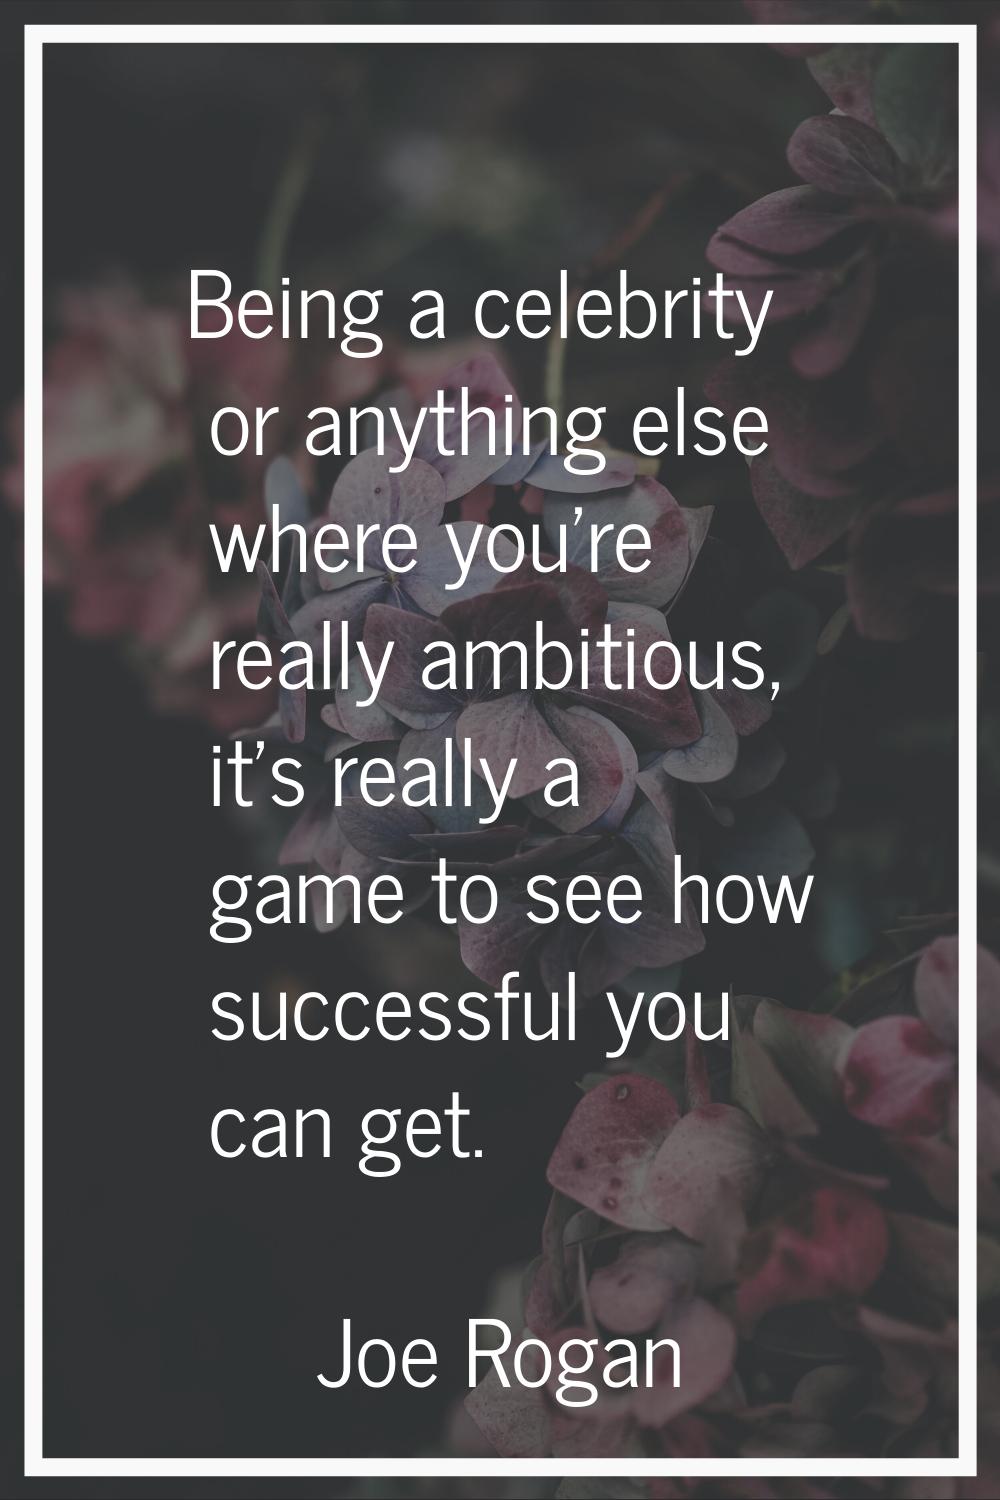 Being a celebrity or anything else where you're really ambitious, it's really a game to see how suc